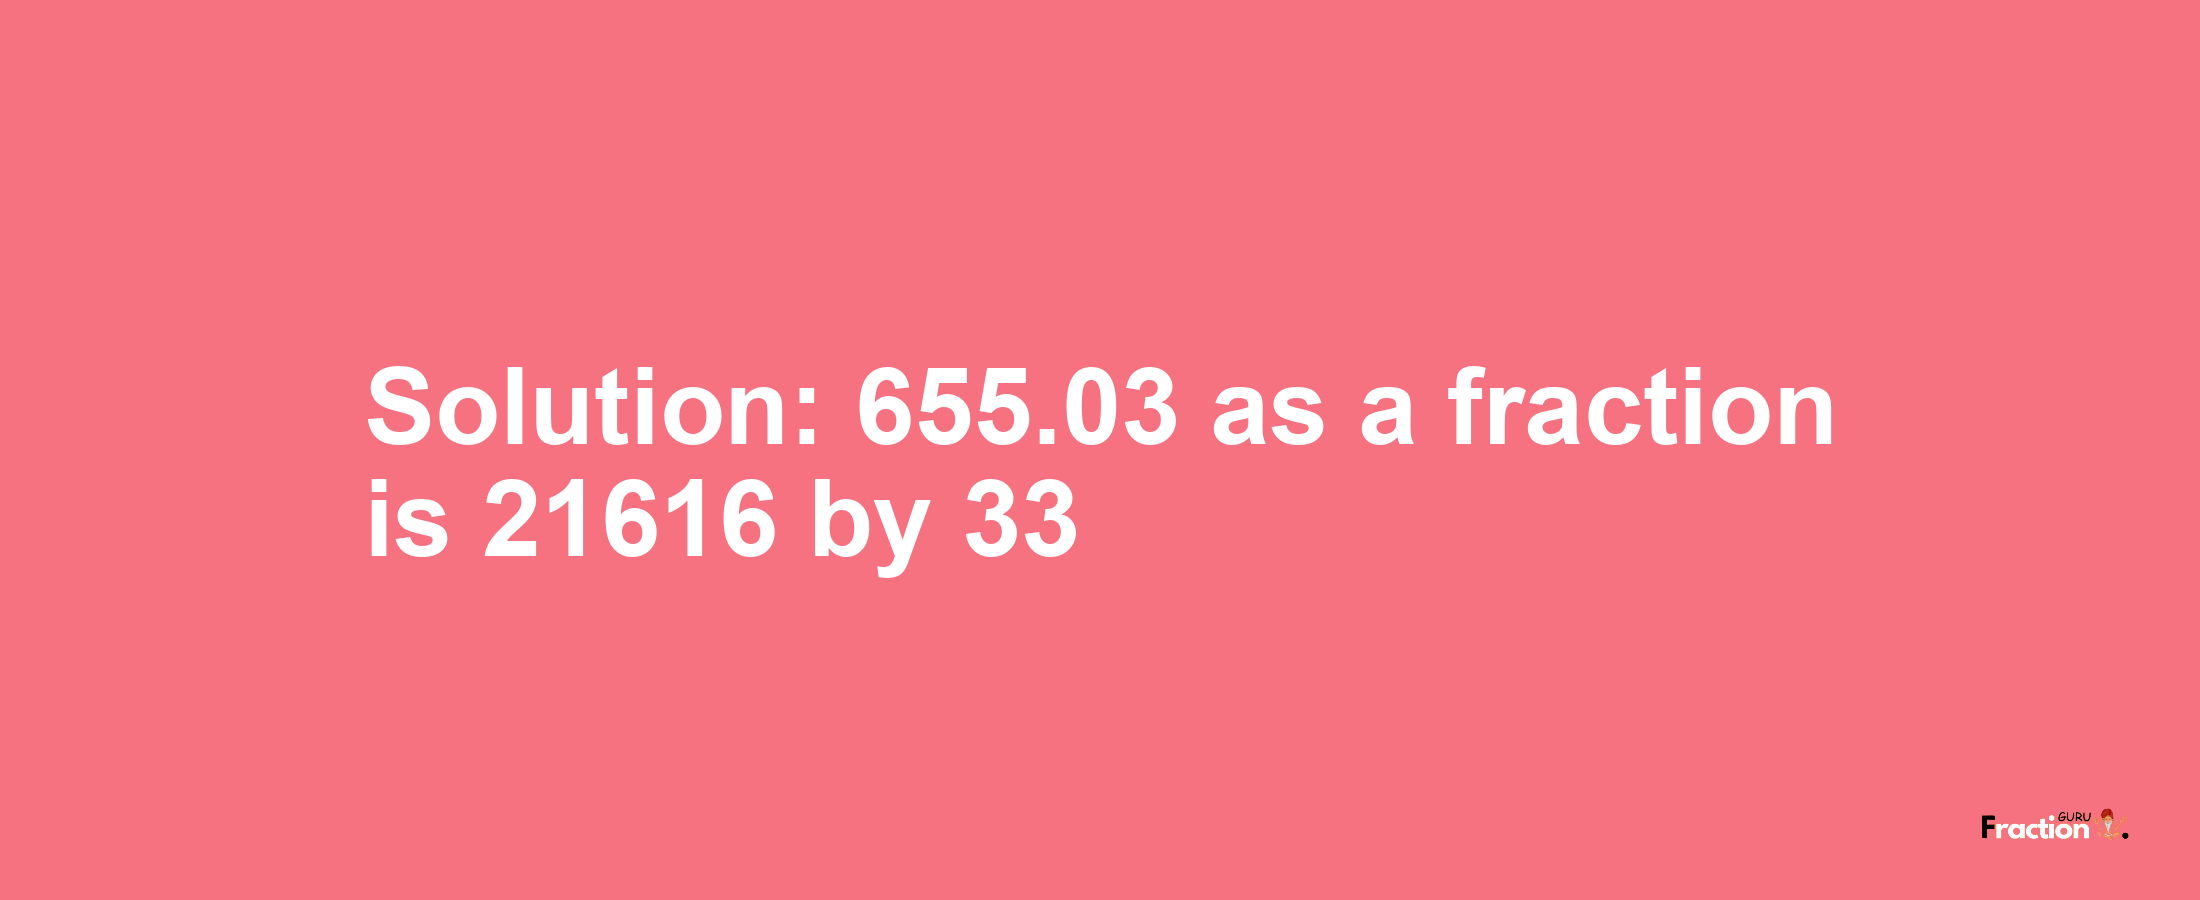 Solution:655.03 as a fraction is 21616/33